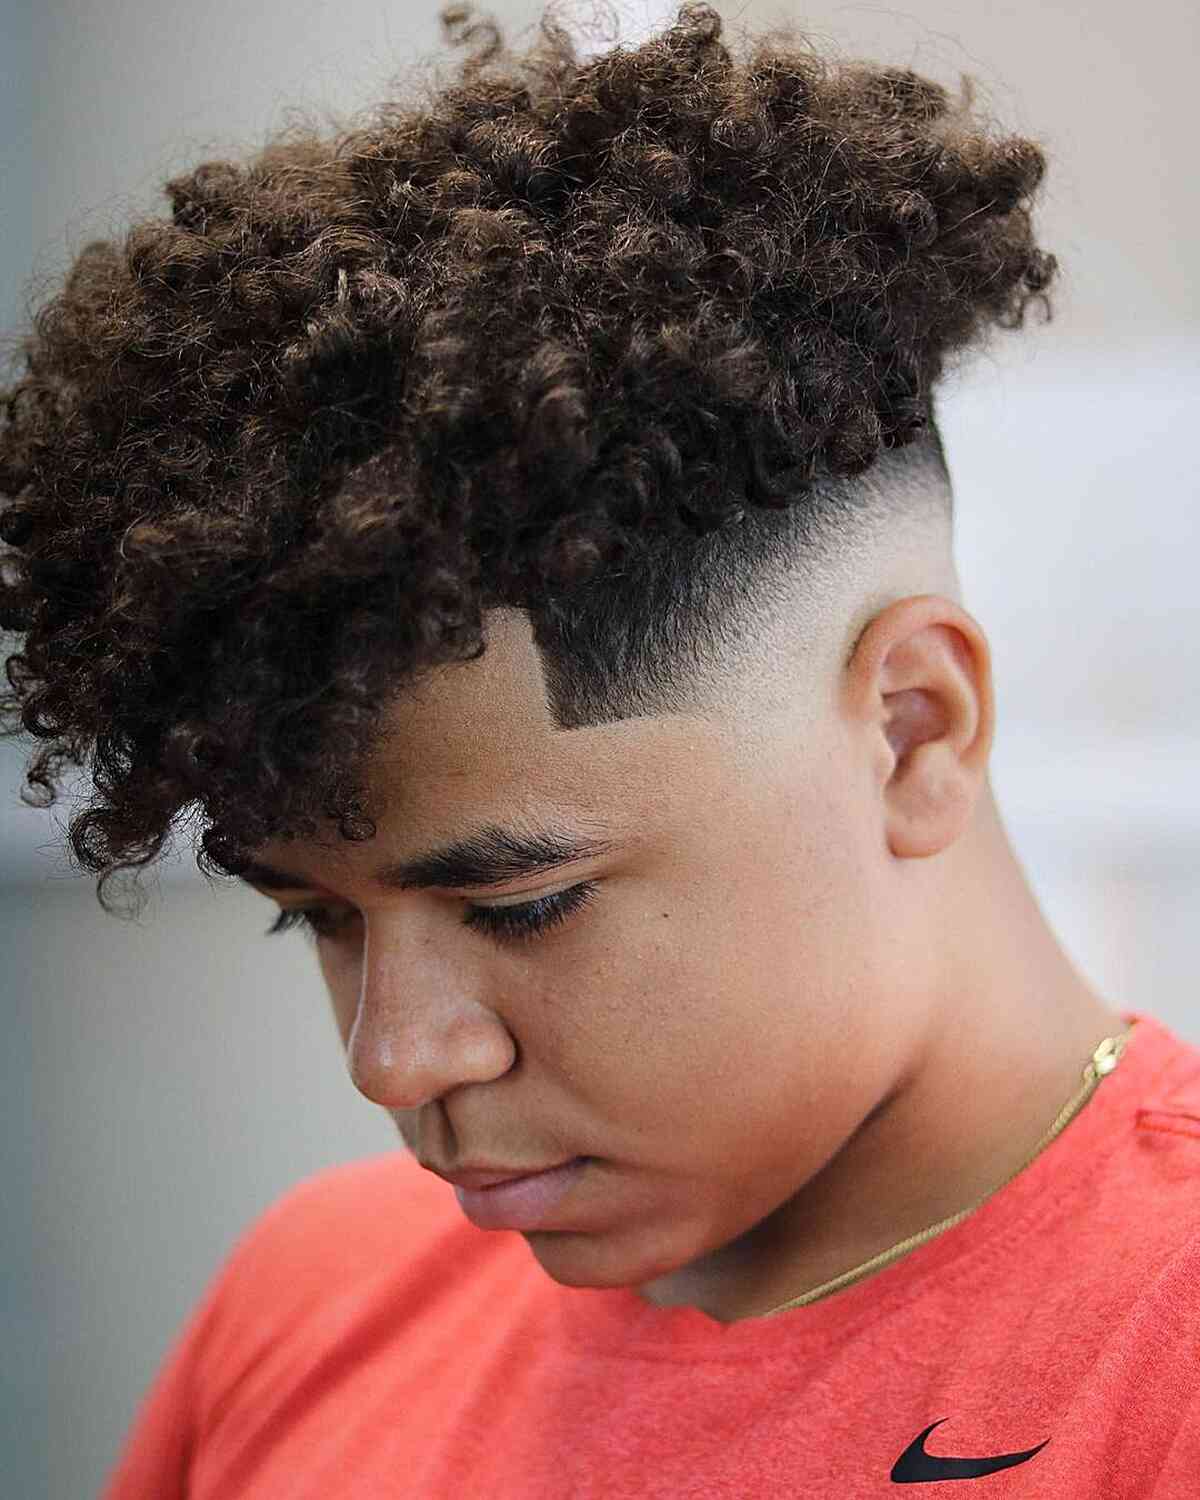 Mid Bald Fade Cut with a Curly Top for Teen Boys